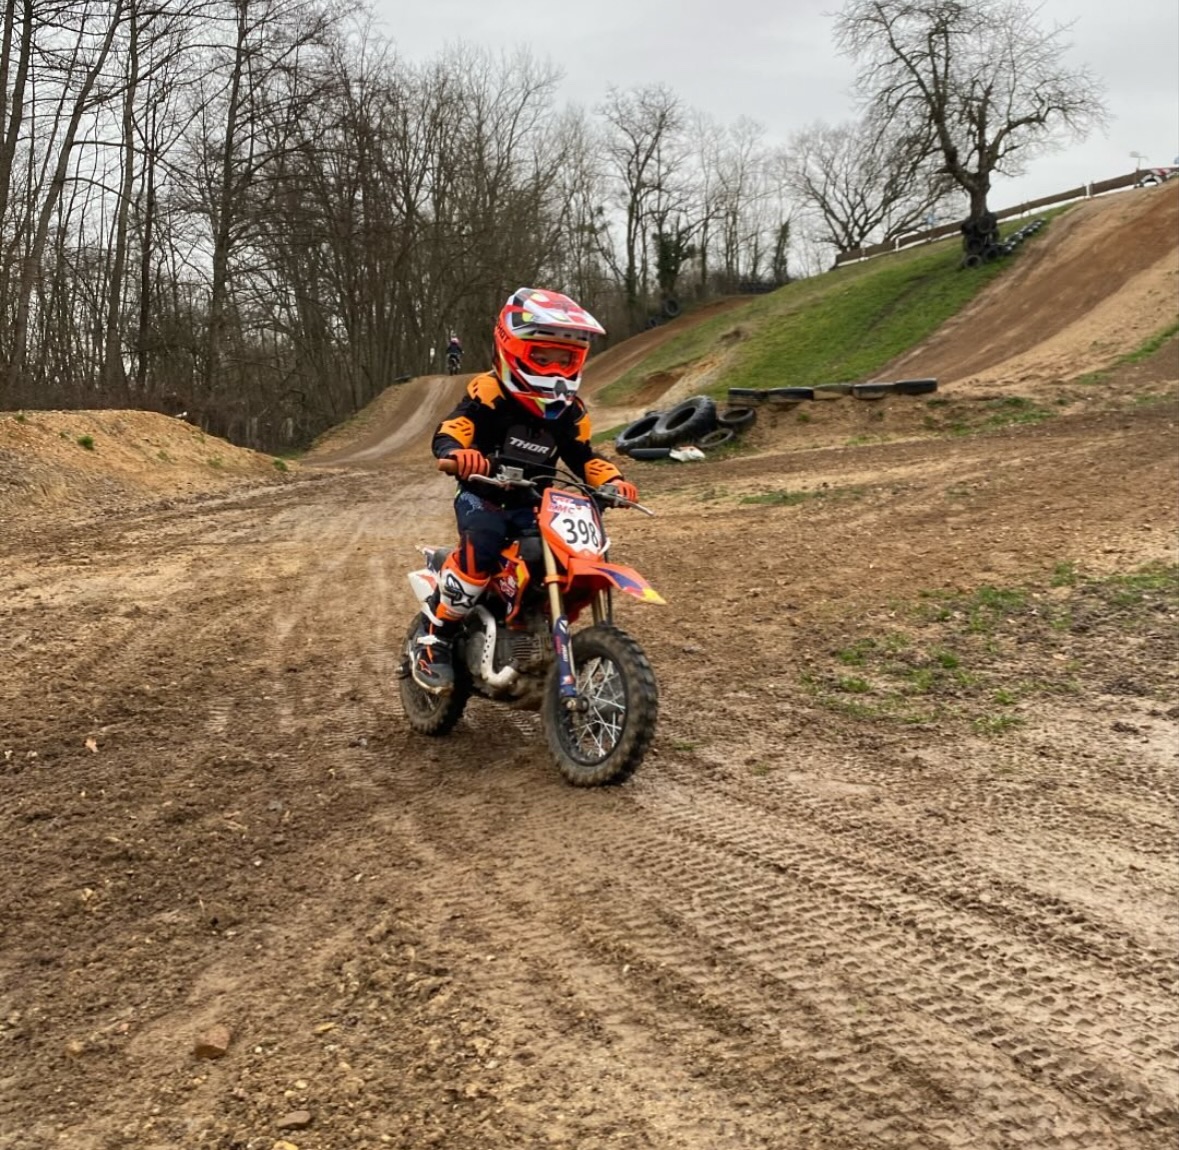 Everyone’s having a great time on our bikes!  #50A
@maxence_mart398
—
#ycf #moto #motocross